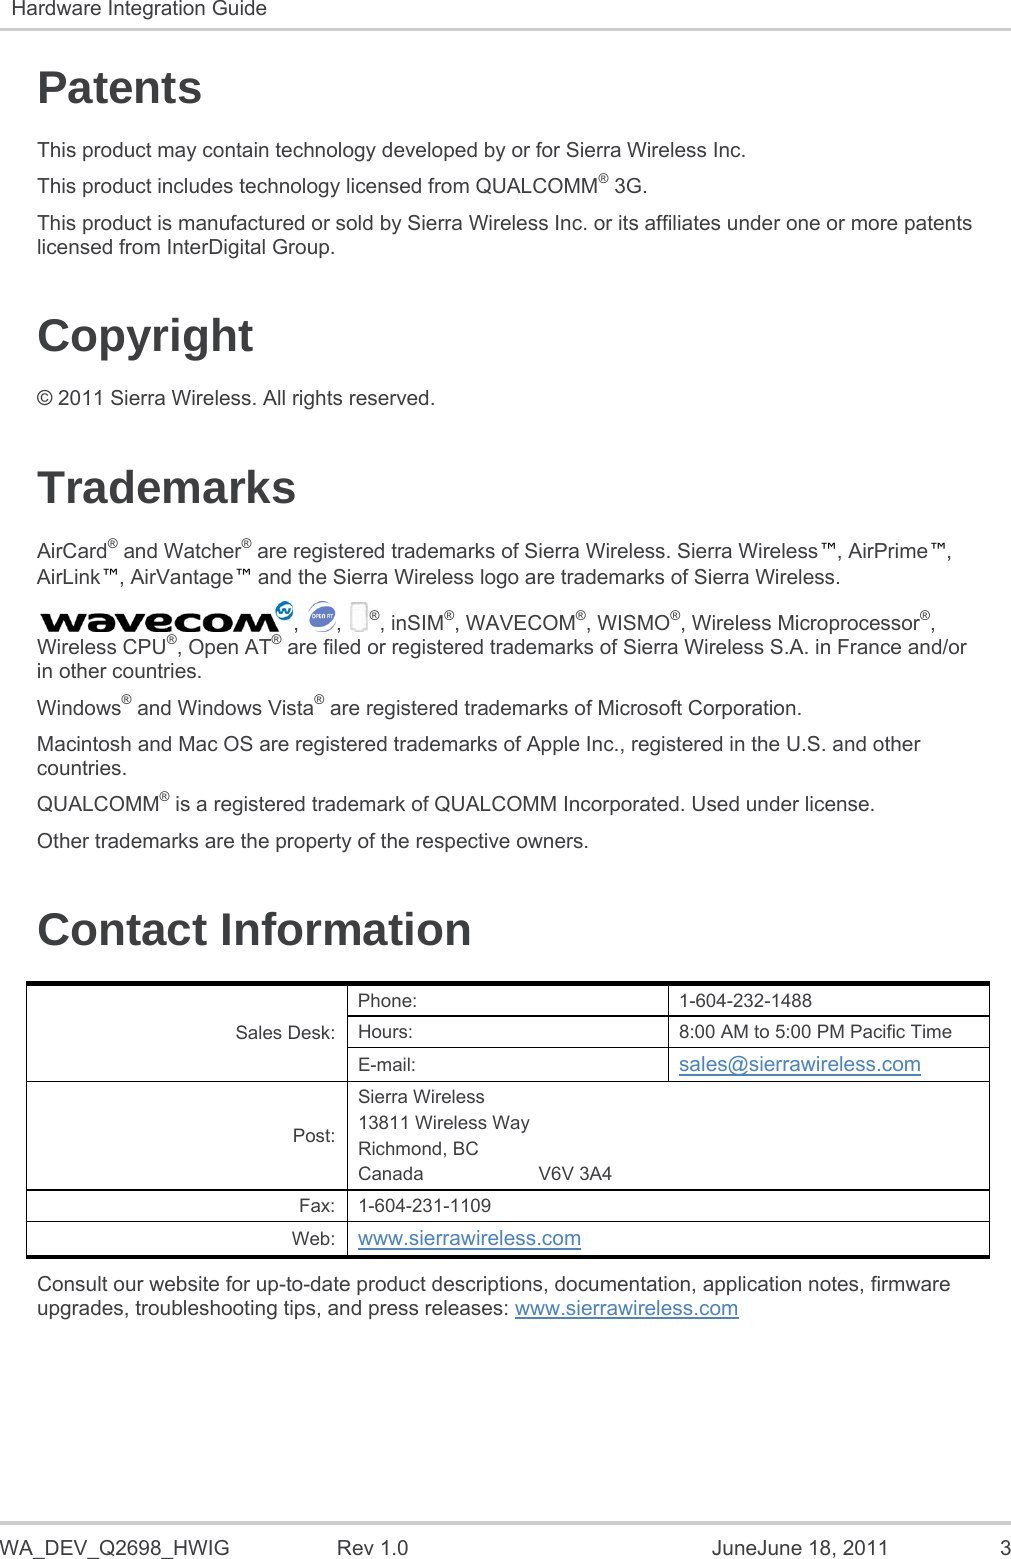   WA_DEV_Q2698_HWIG  Rev 1.0  JuneJune 18, 2011  3 Hardware Integration Guide   Patents This product may contain technology developed by or for Sierra Wireless Inc. This product includes technology licensed from QUALCOMM® 3G. This product is manufactured or sold by Sierra Wireless Inc. or its affiliates under one or more patents licensed from InterDigital Group. Copyright © 2011 Sierra Wireless. All rights reserved. Trademarks AirCard® and Watcher® are registered trademarks of Sierra Wireless. Sierra Wireless™, AirPrime™, AirLink™, AirVantage™ and the Sierra Wireless logo are trademarks of Sierra Wireless. , , ®, inSIM®, WAVECOM®, WISMO®, Wireless Microprocessor®, Wireless CPU®, Open AT® are filed or registered trademarks of Sierra Wireless S.A. in France and/or in other countries. Windows® and Windows Vista® are registered trademarks of Microsoft Corporation. Macintosh and Mac OS are registered trademarks of Apple Inc., registered in the U.S. and other countries. QUALCOMM® is a registered trademark of QUALCOMM Incorporated. Used under license. Other trademarks are the property of the respective owners. Contact Information Sales Desk: Phone: 1-604-232-1488 Hours:  8:00 AM to 5:00 PM Pacific Time E-mail:  sales@sierrawireless.com Post: Sierra Wireless 13811 Wireless Way Richmond, BC Canada                      V6V 3A4 Fax: 1-604-231-1109 Web:  www.sierrawireless.com Consult our website for up-to-date product descriptions, documentation, application notes, firmware upgrades, troubleshooting tips, and press releases: www.sierrawireless.com   